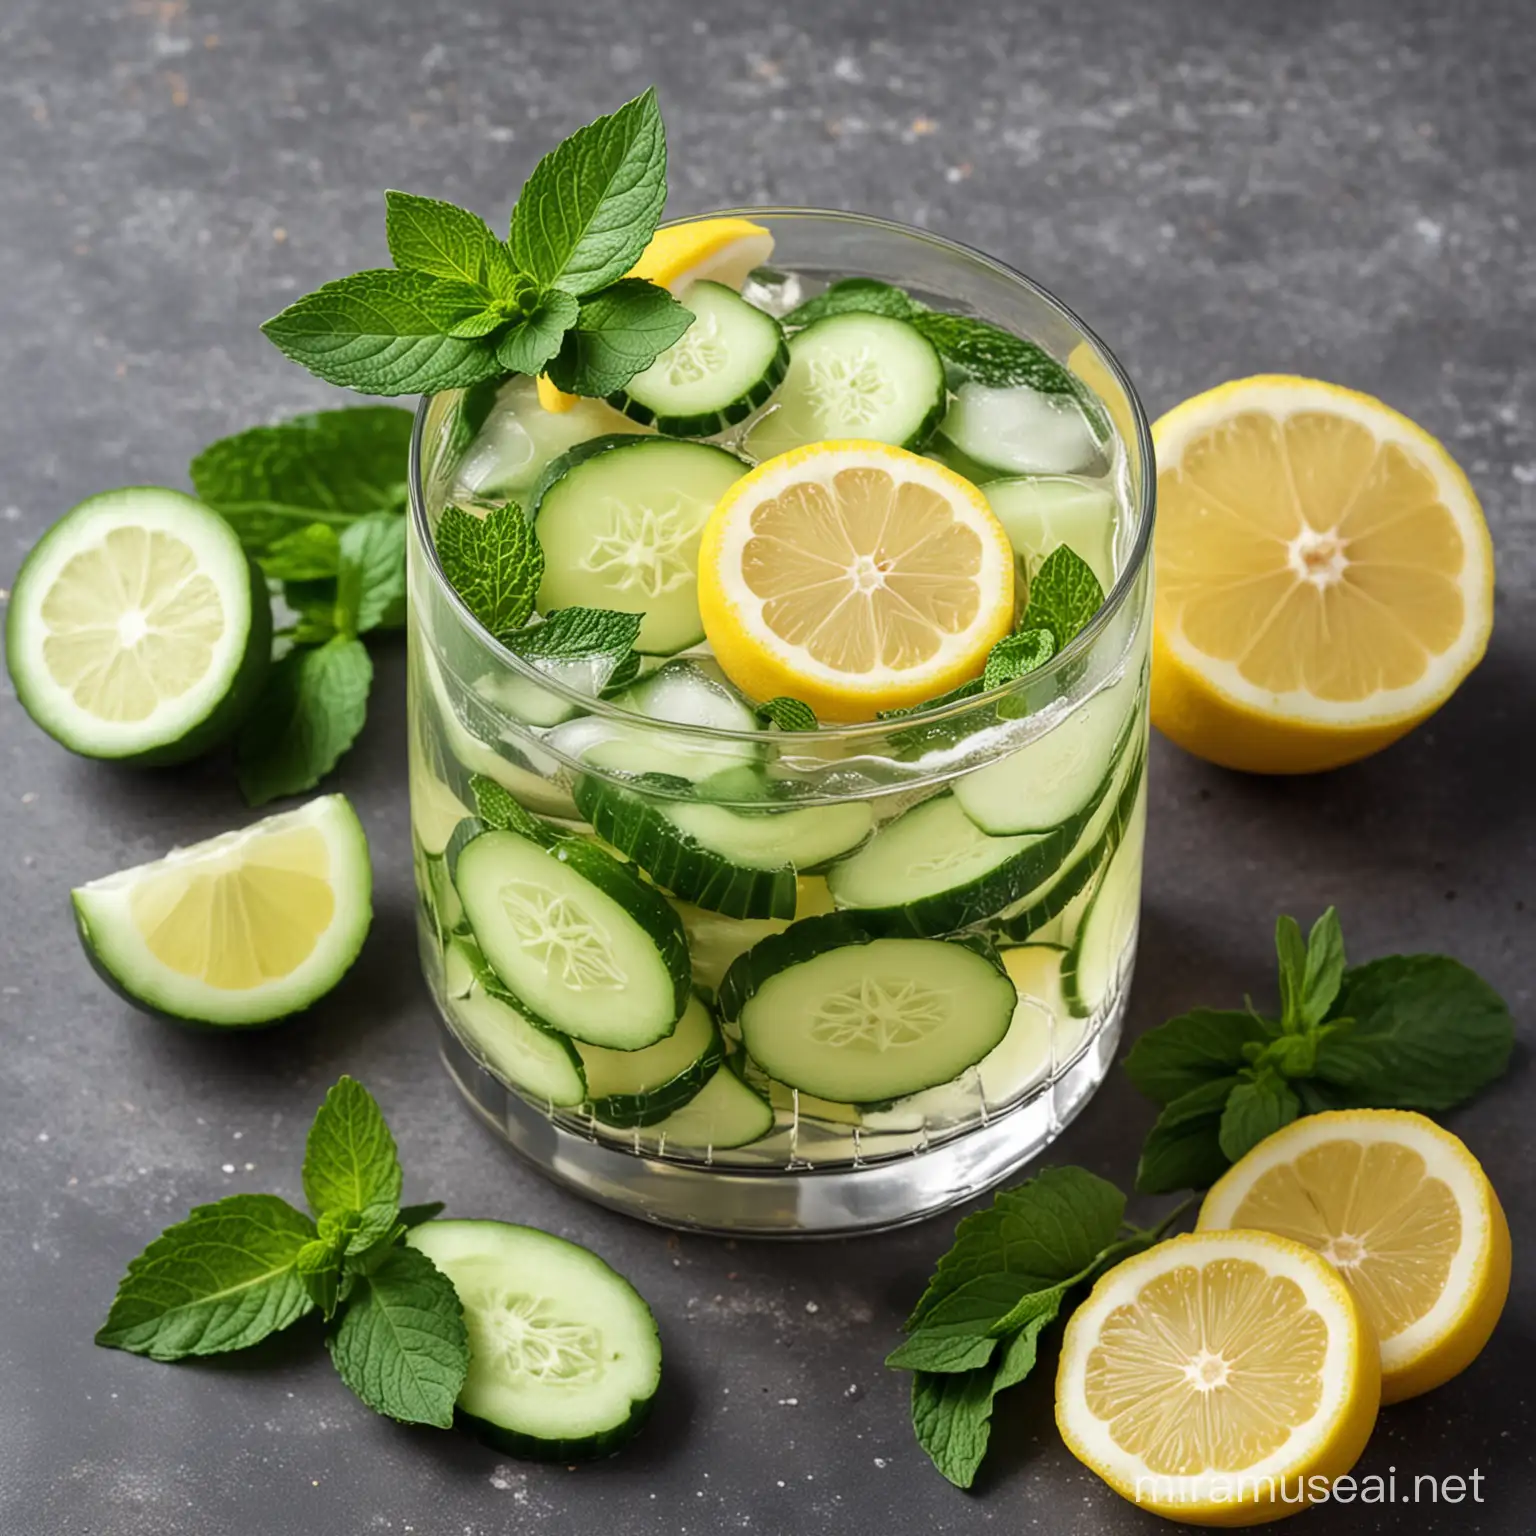 drink with cucumber slices, lemon slices, ginger slices and fresh mint leaves